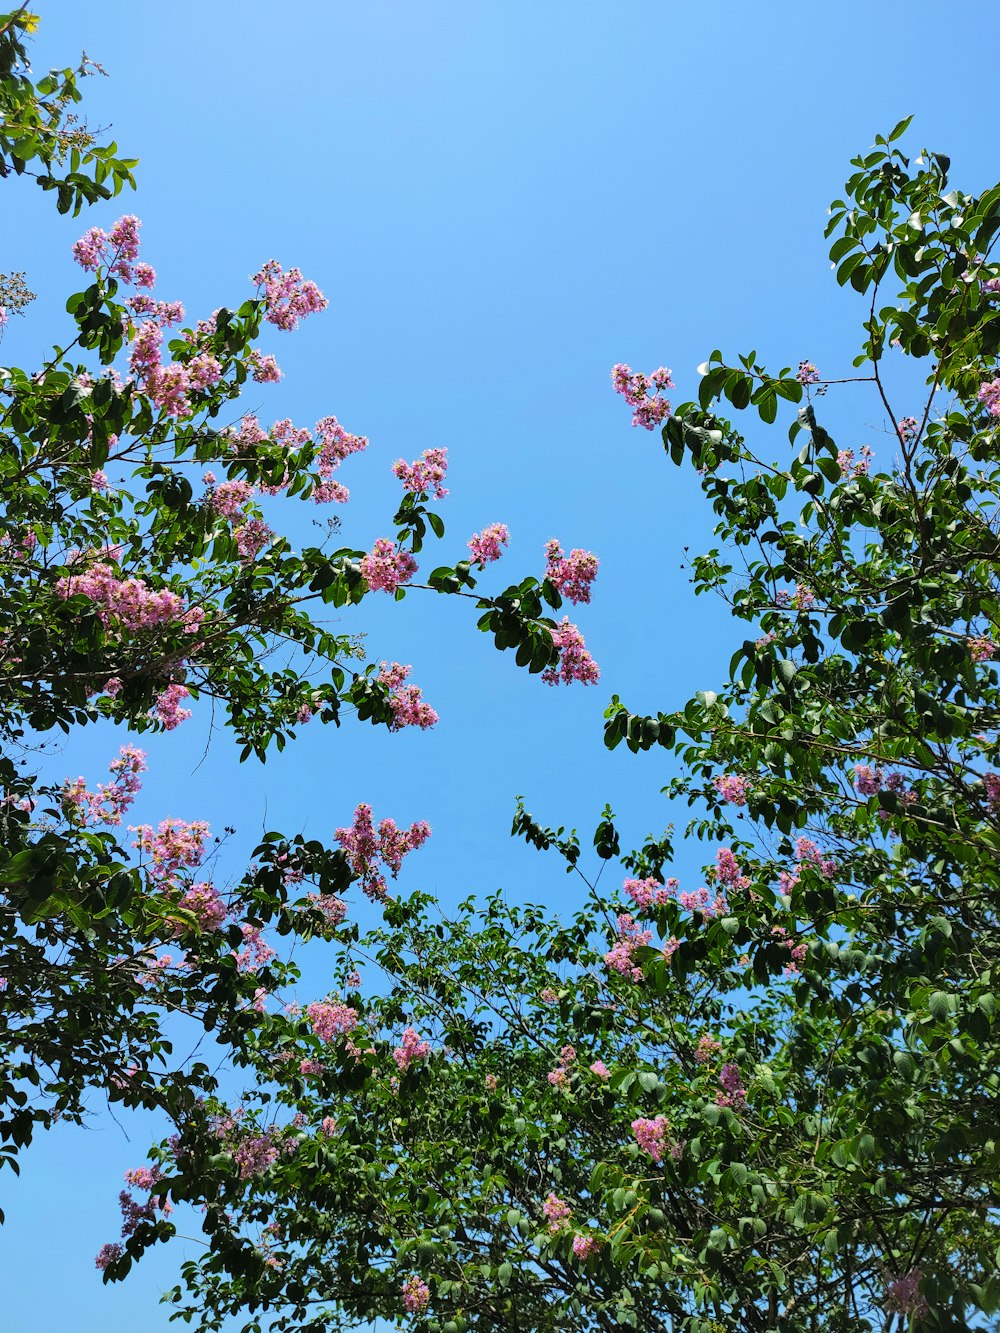 pink flowers are blooming on the branches of trees